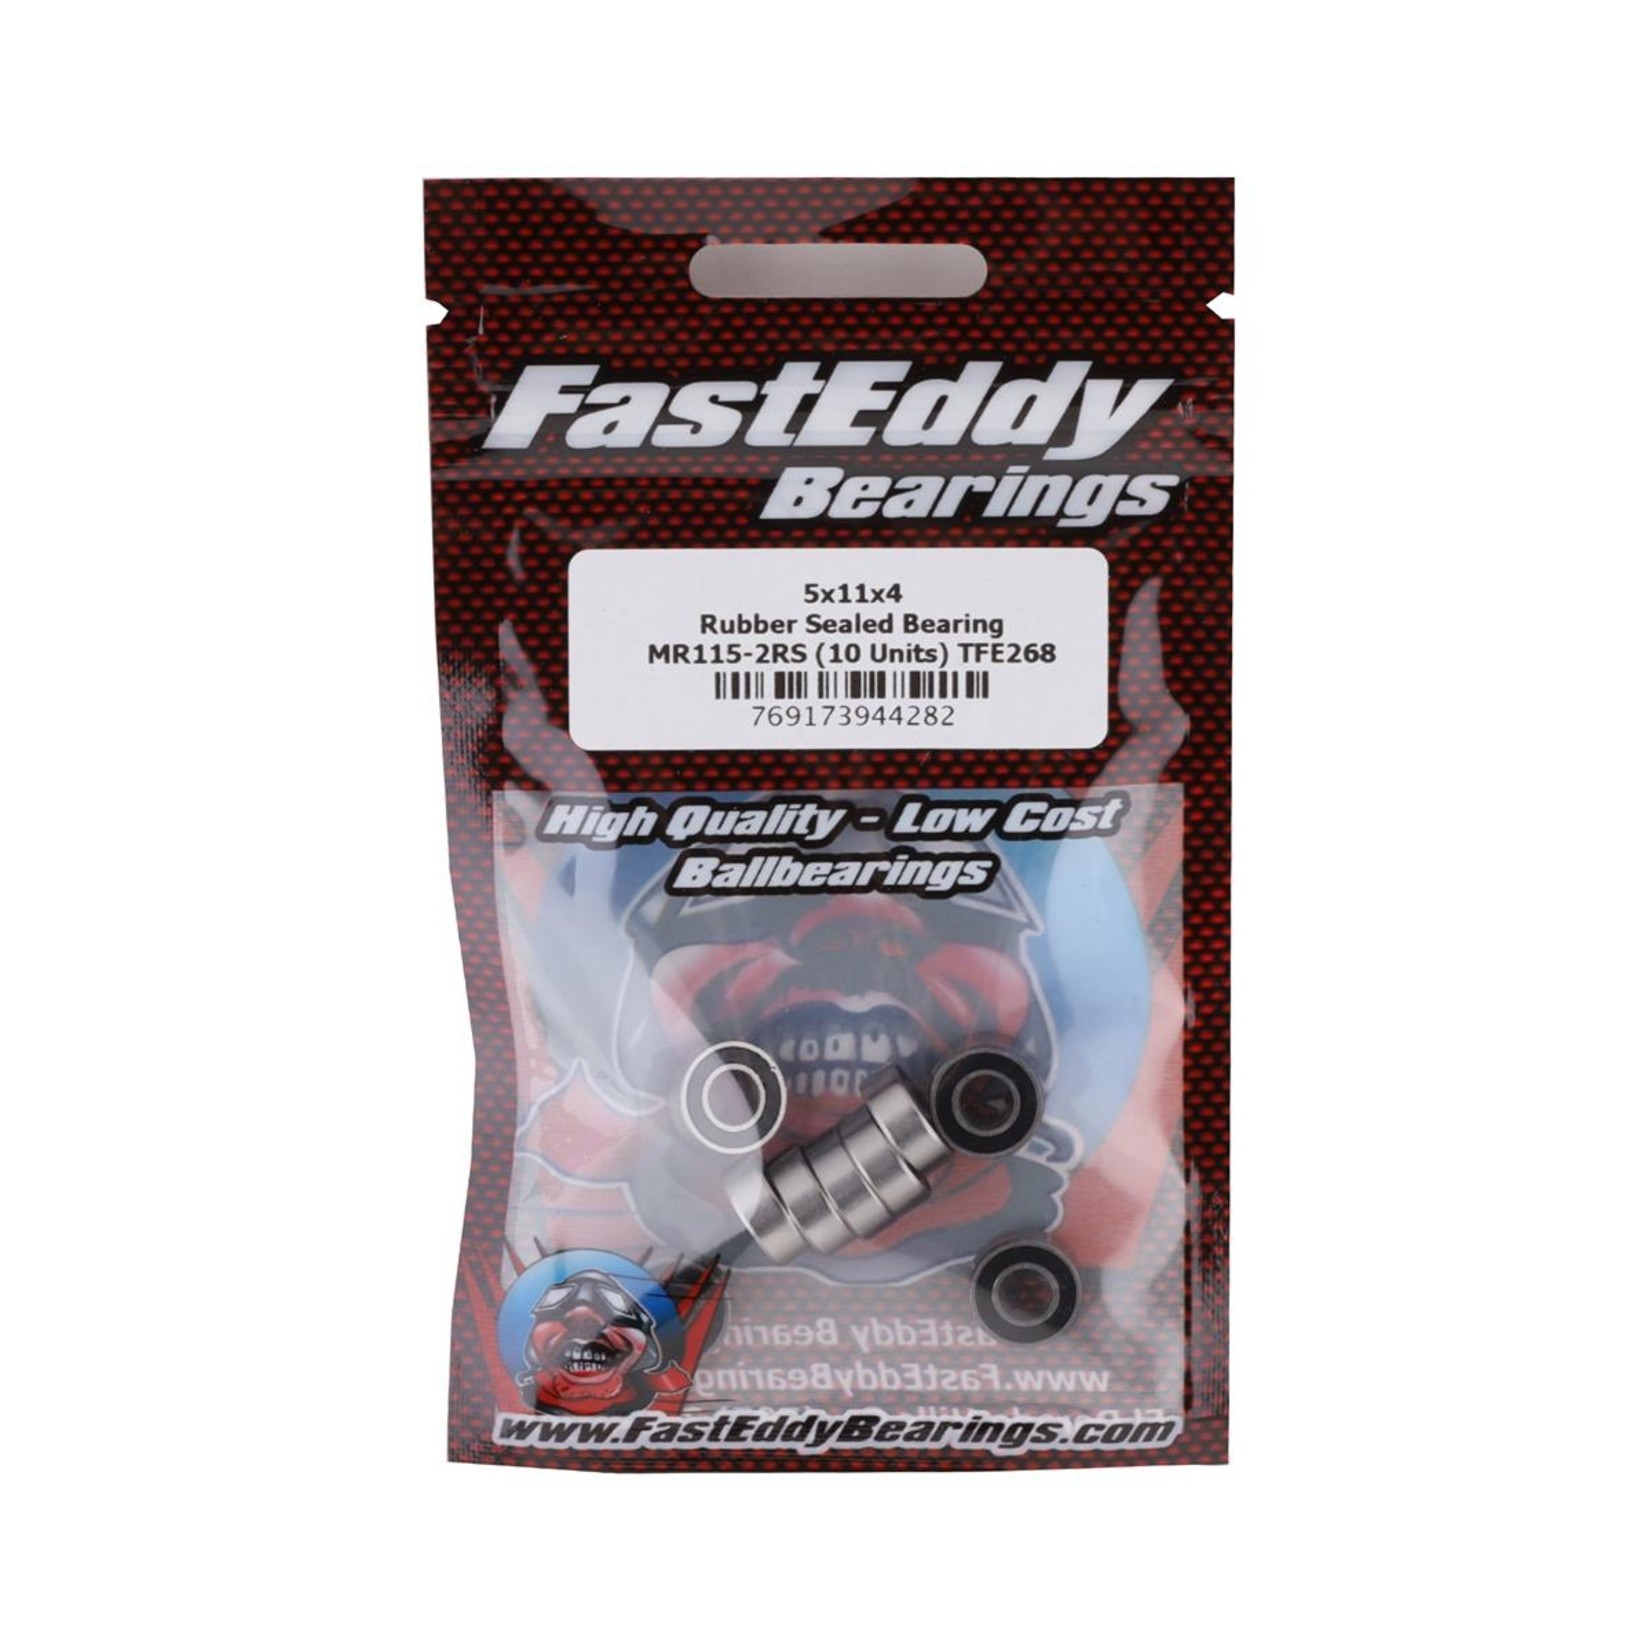 Fast Eddy 5x11x4 Rubber Sealed Bearing, MR115-2RS (10)